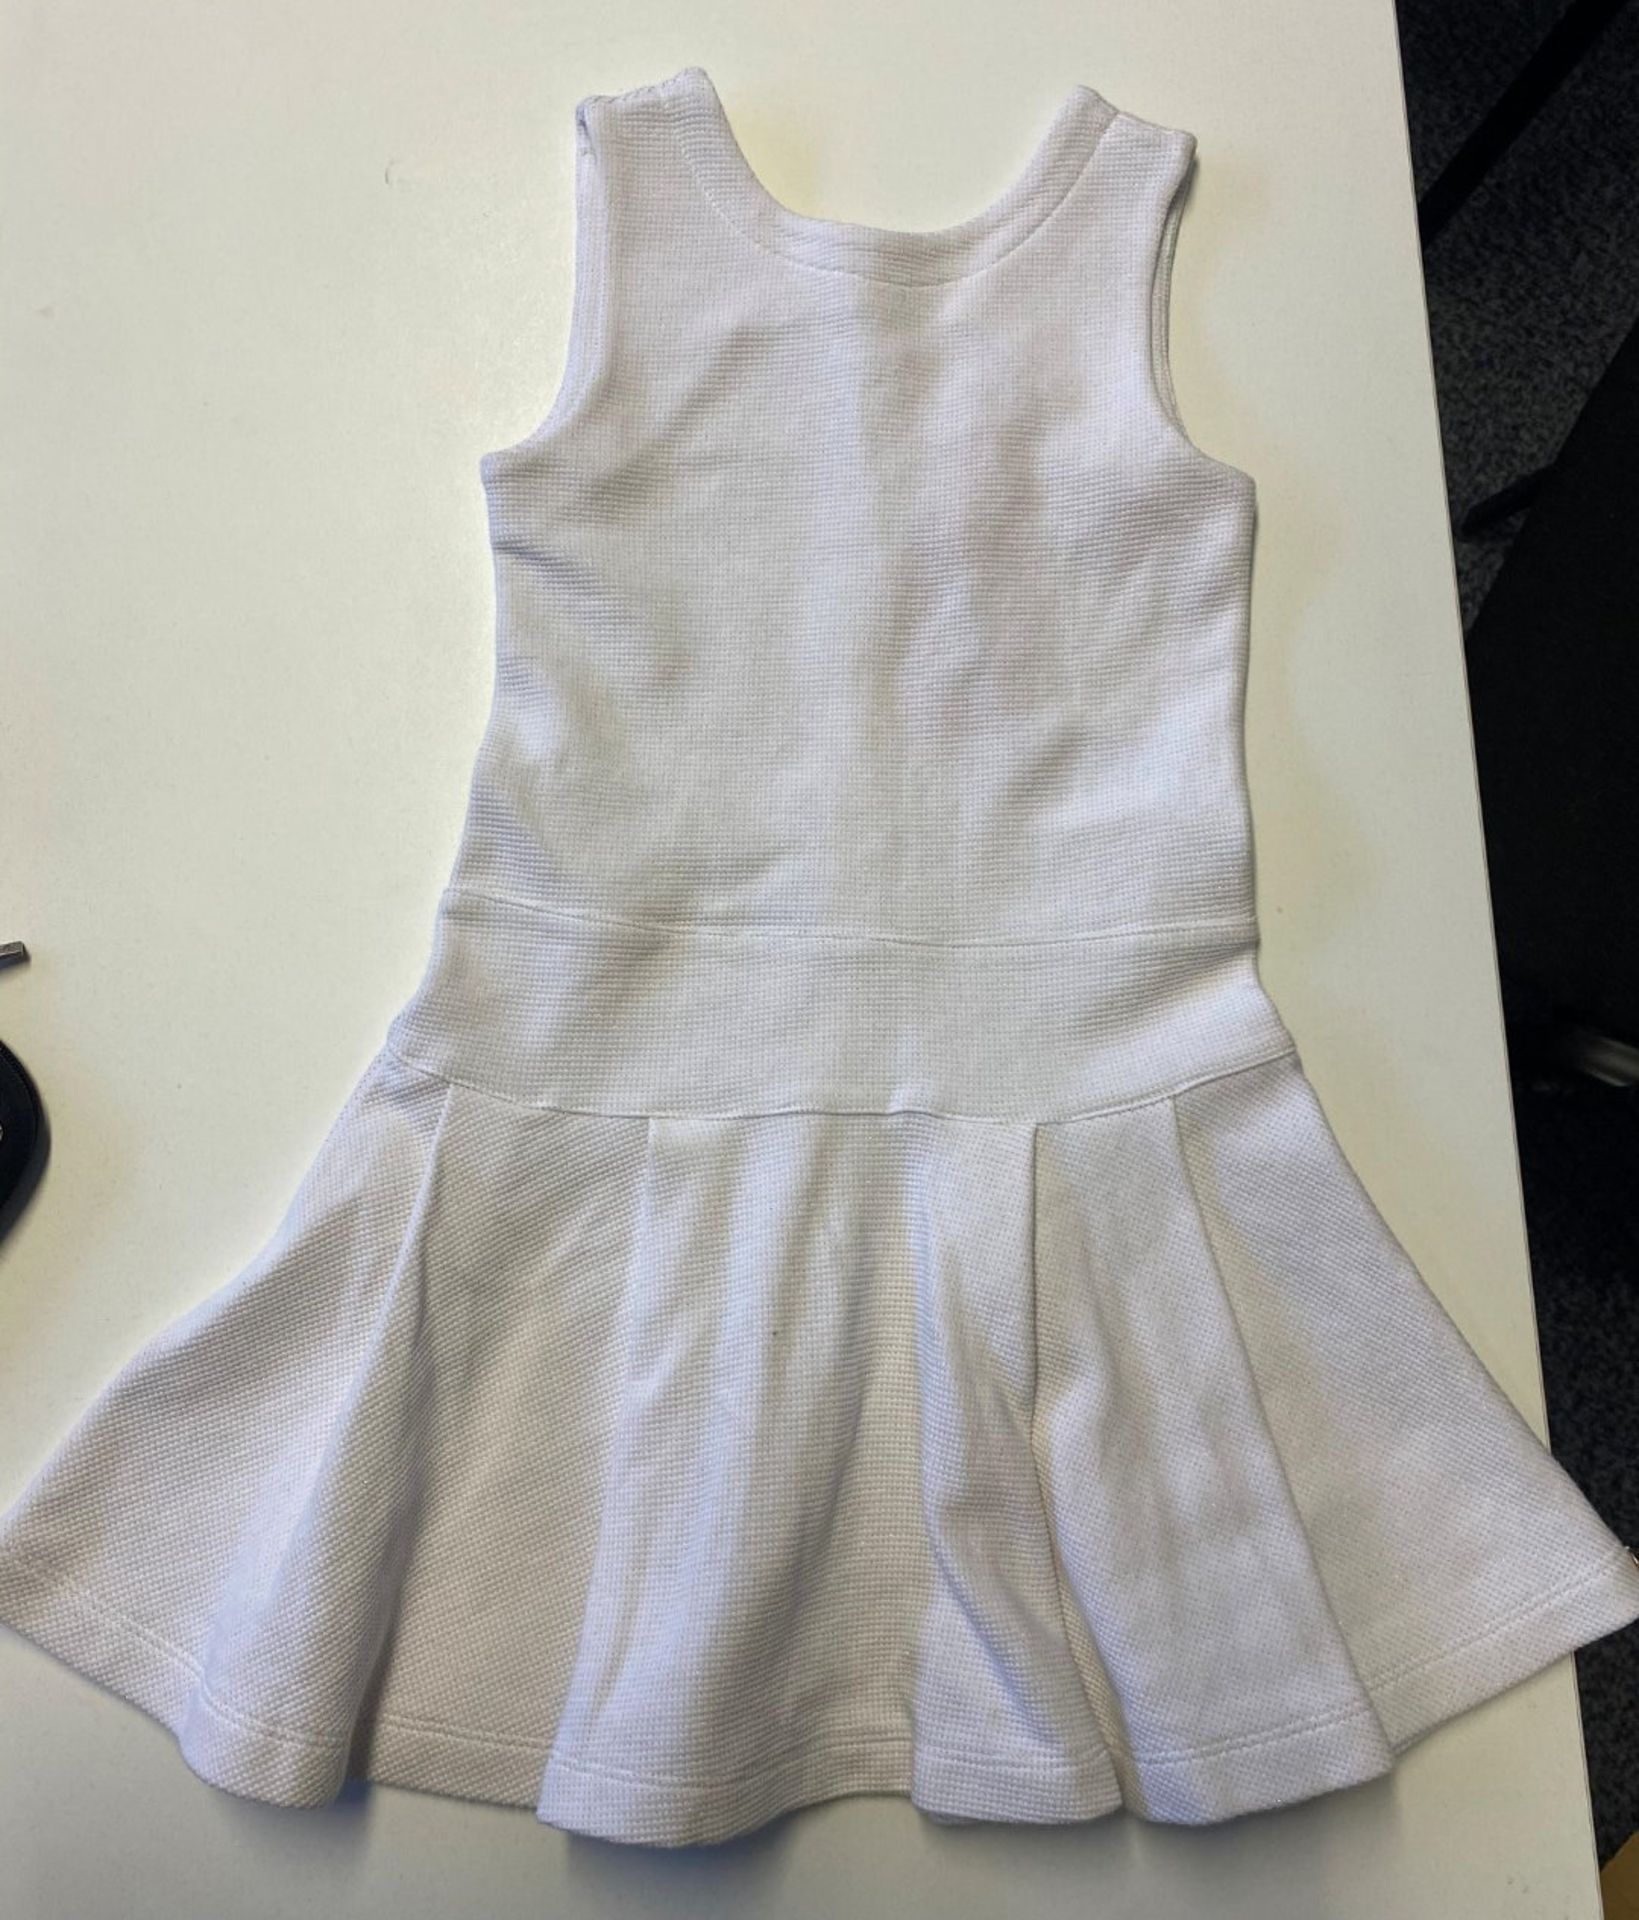 10 x Assorted Items Of Designer Children's Clothing - Suitable for Age 6 years - Recently Removed - Image 11 of 53